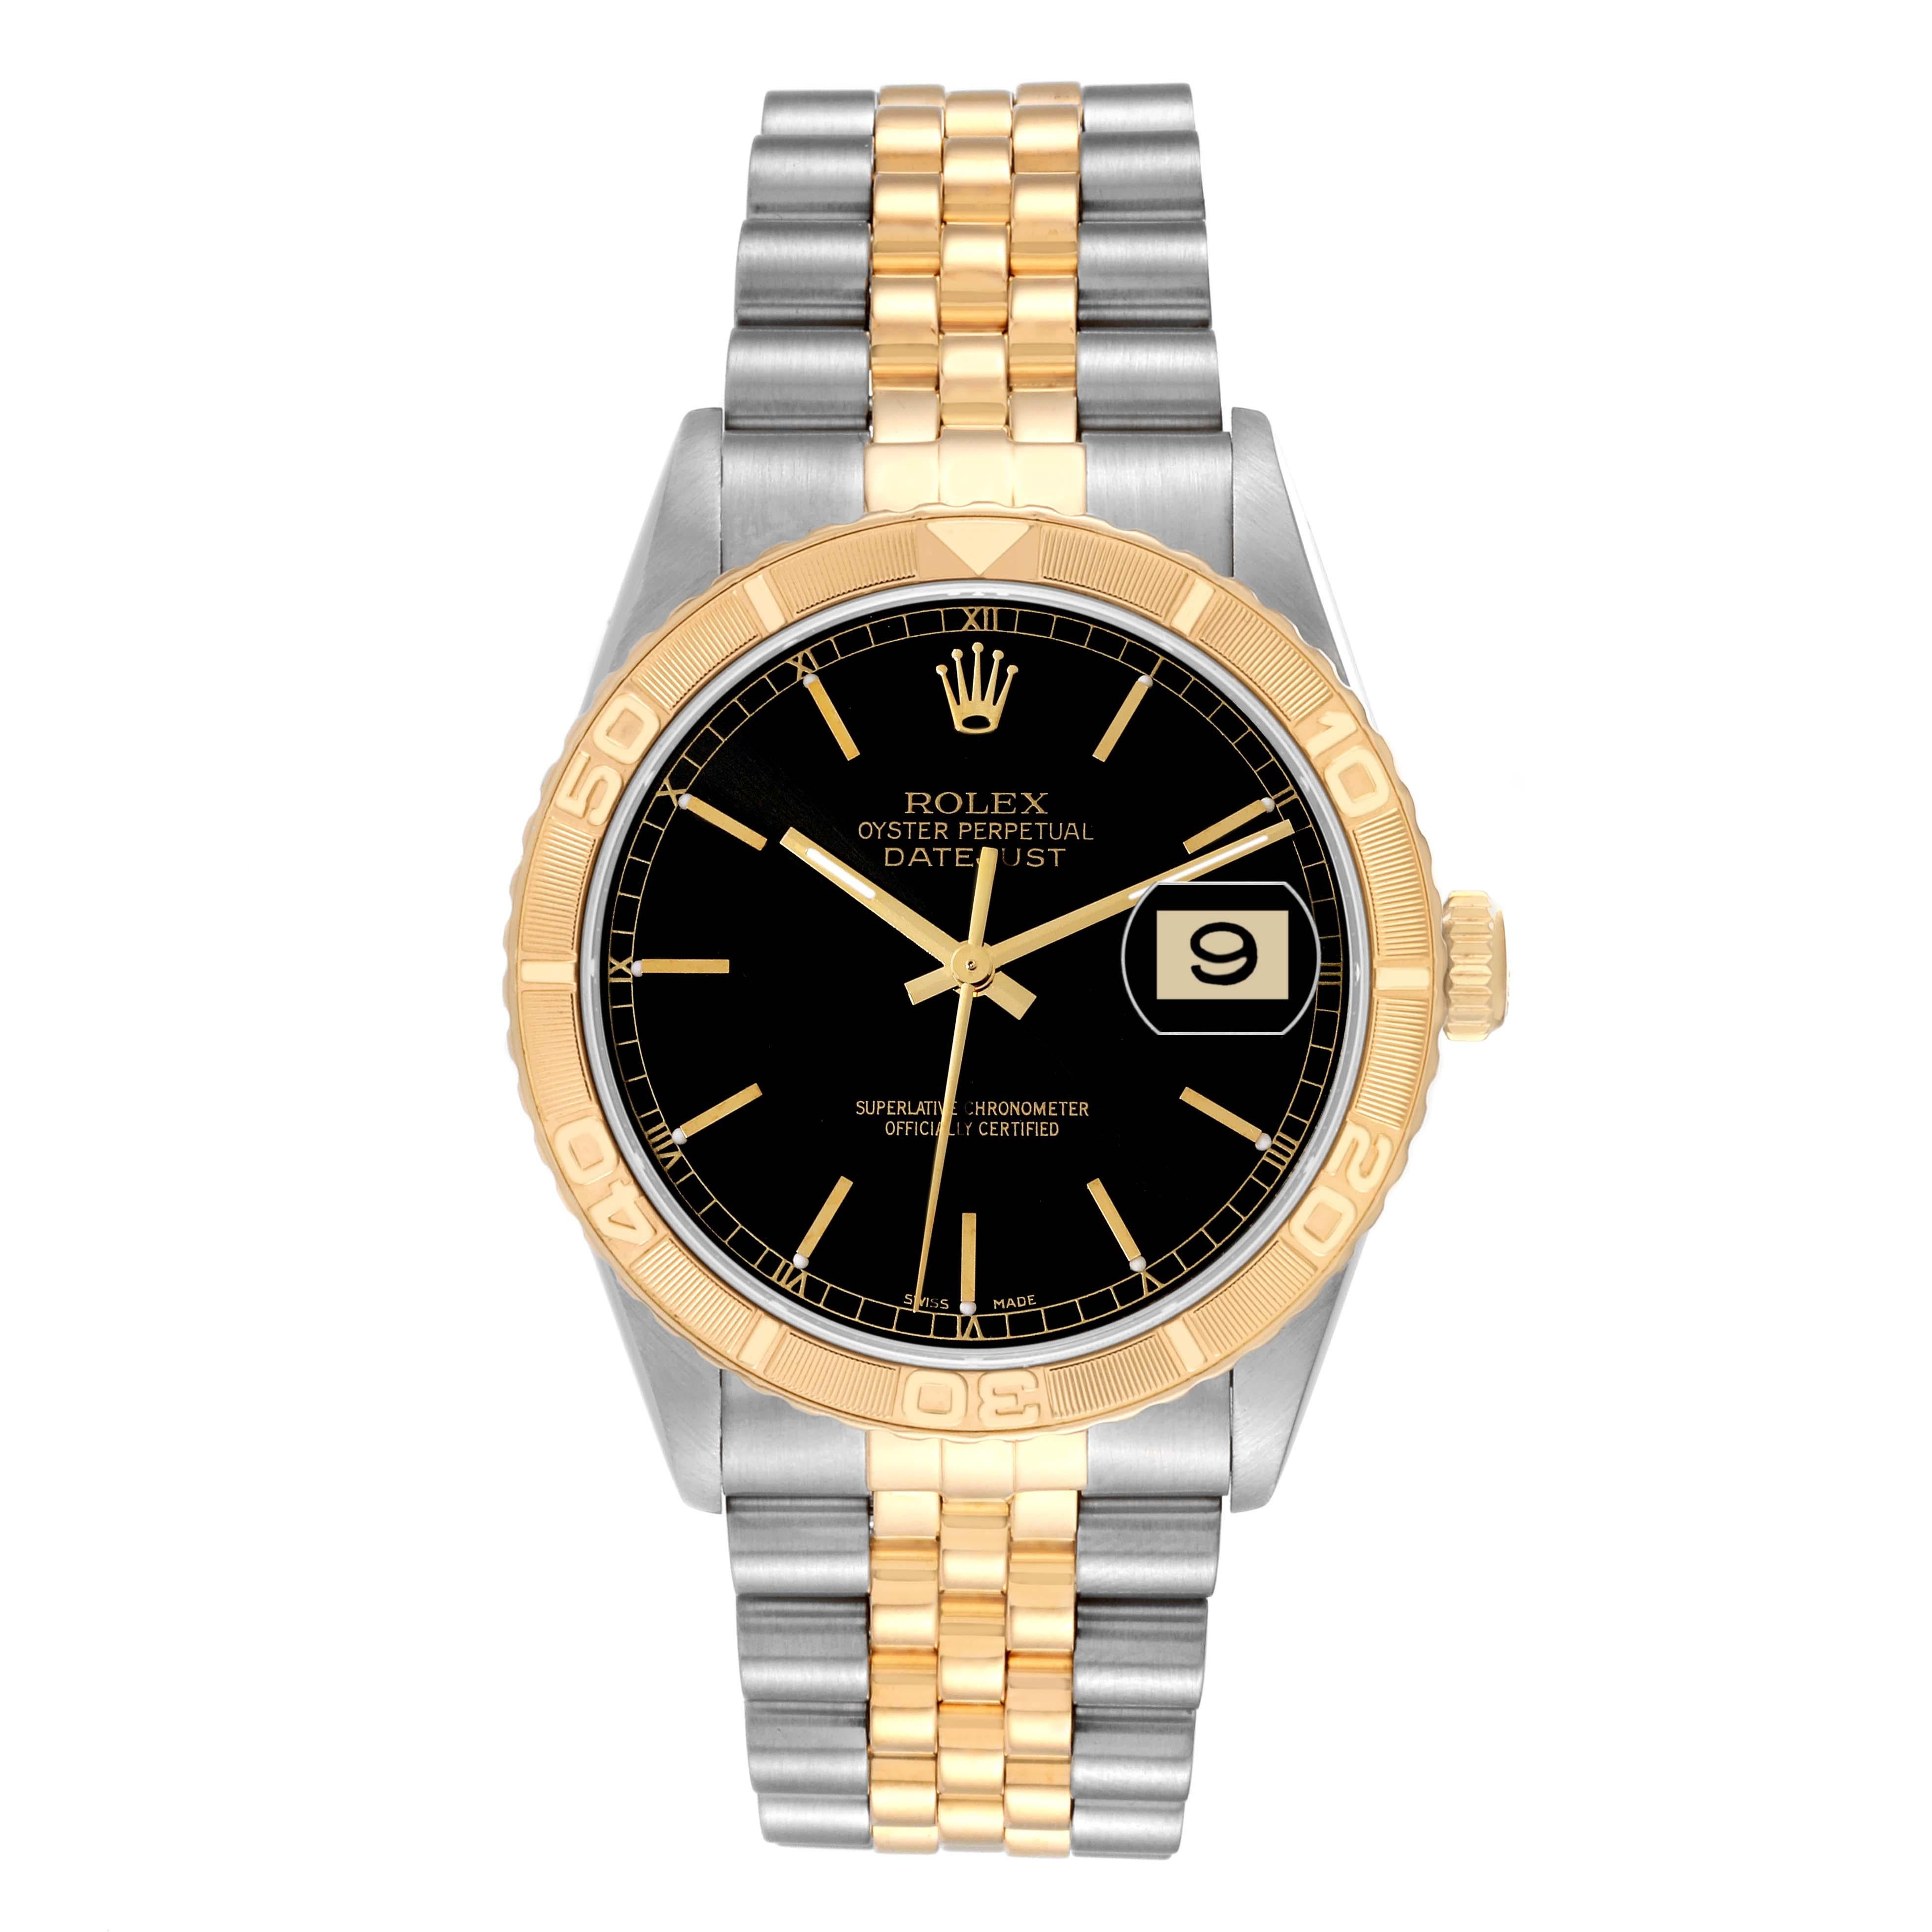 Rolex Datejust Turnograph Black Dial Yellow Gold Steel Mens Watch 16263. Officially certified chronometer automatic self-winding movement. Stainless steel case 36 mm in diameter. Rolex logo on an 18k yellow gold crown. 18k yellow gold thunderbird